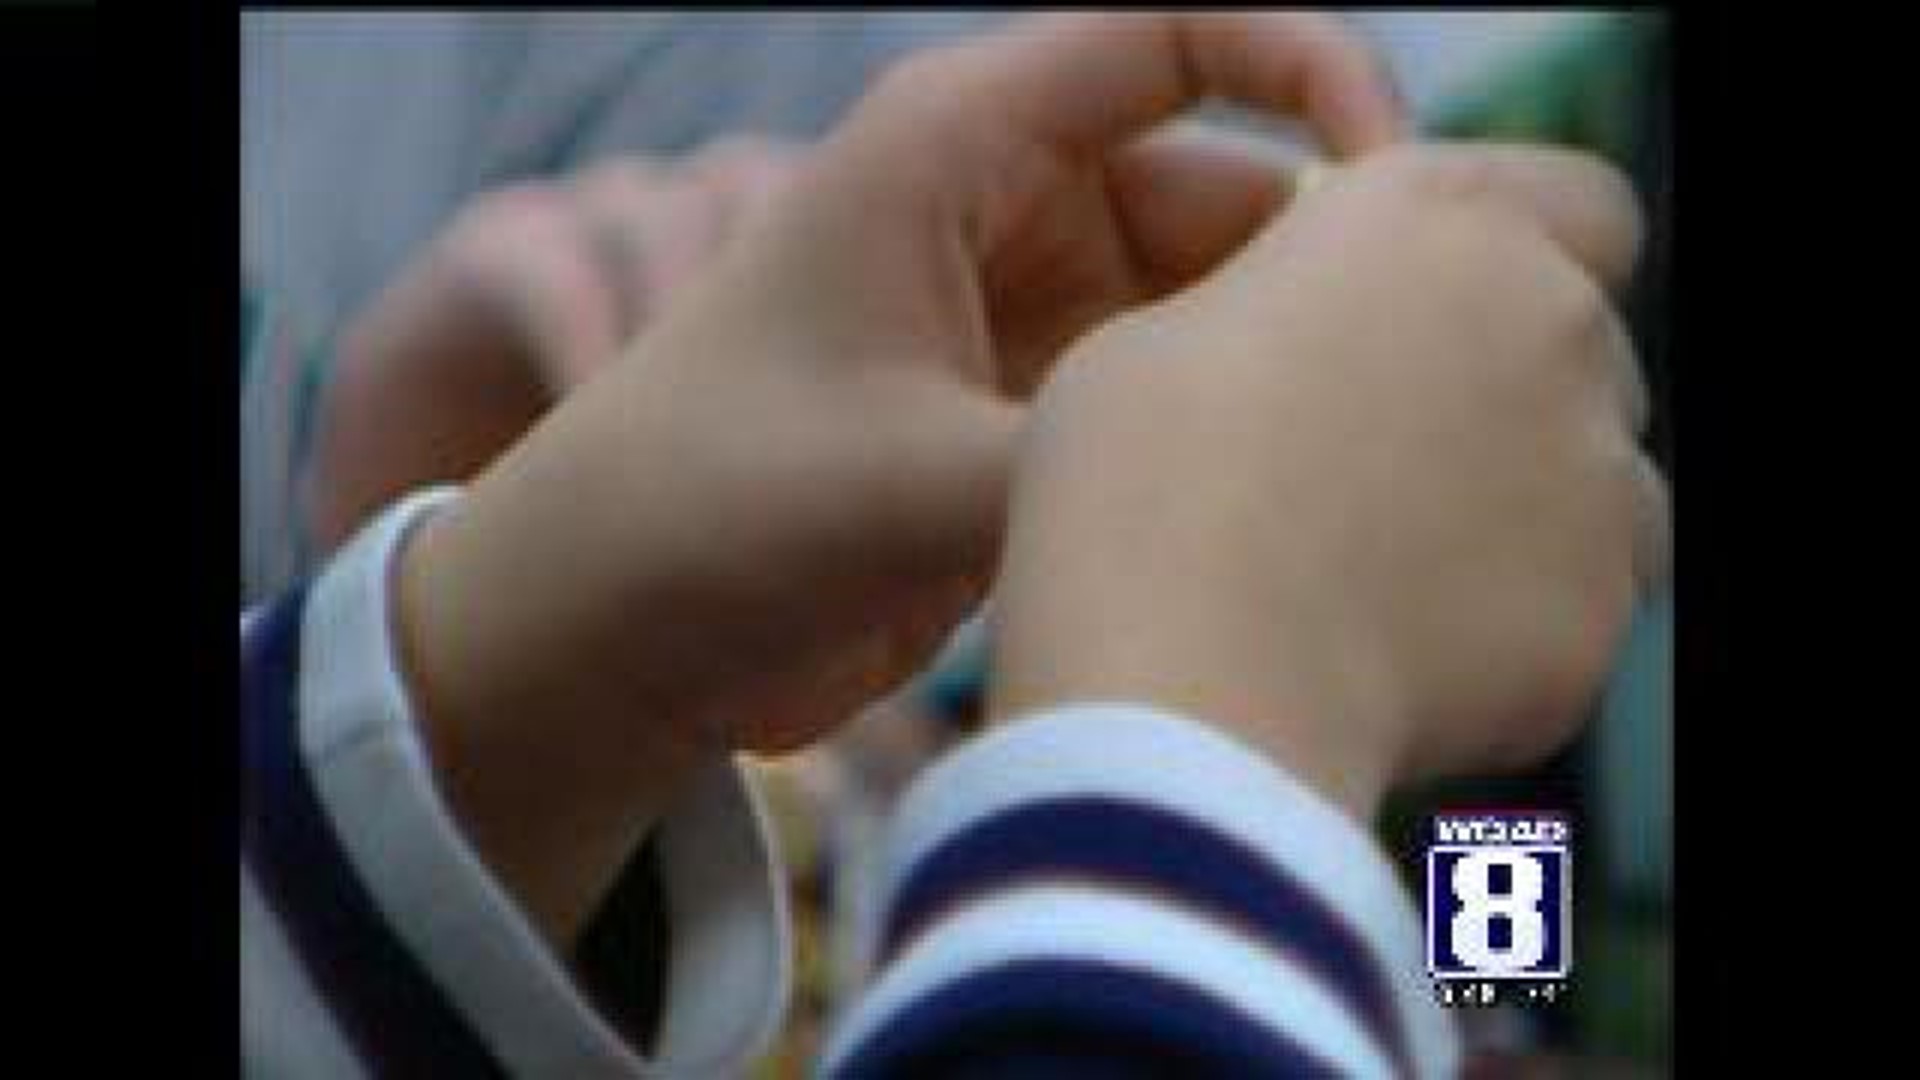 Food and skin allergies becoming more common in children